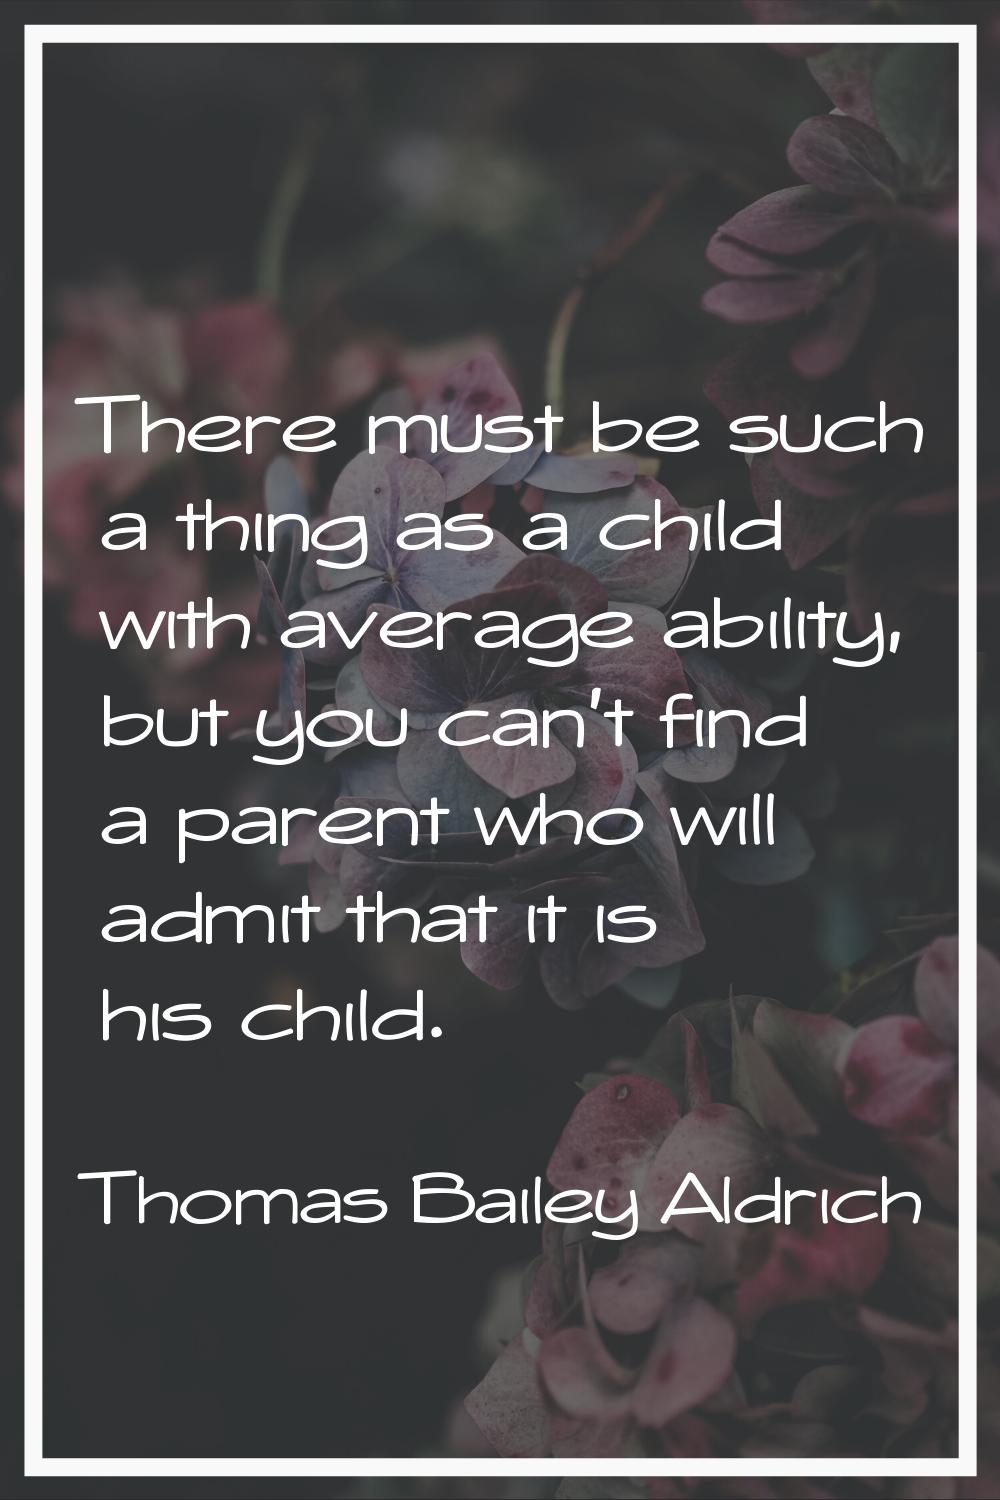 There must be such a thing as a child with average ability, but you can't find a parent who will ad